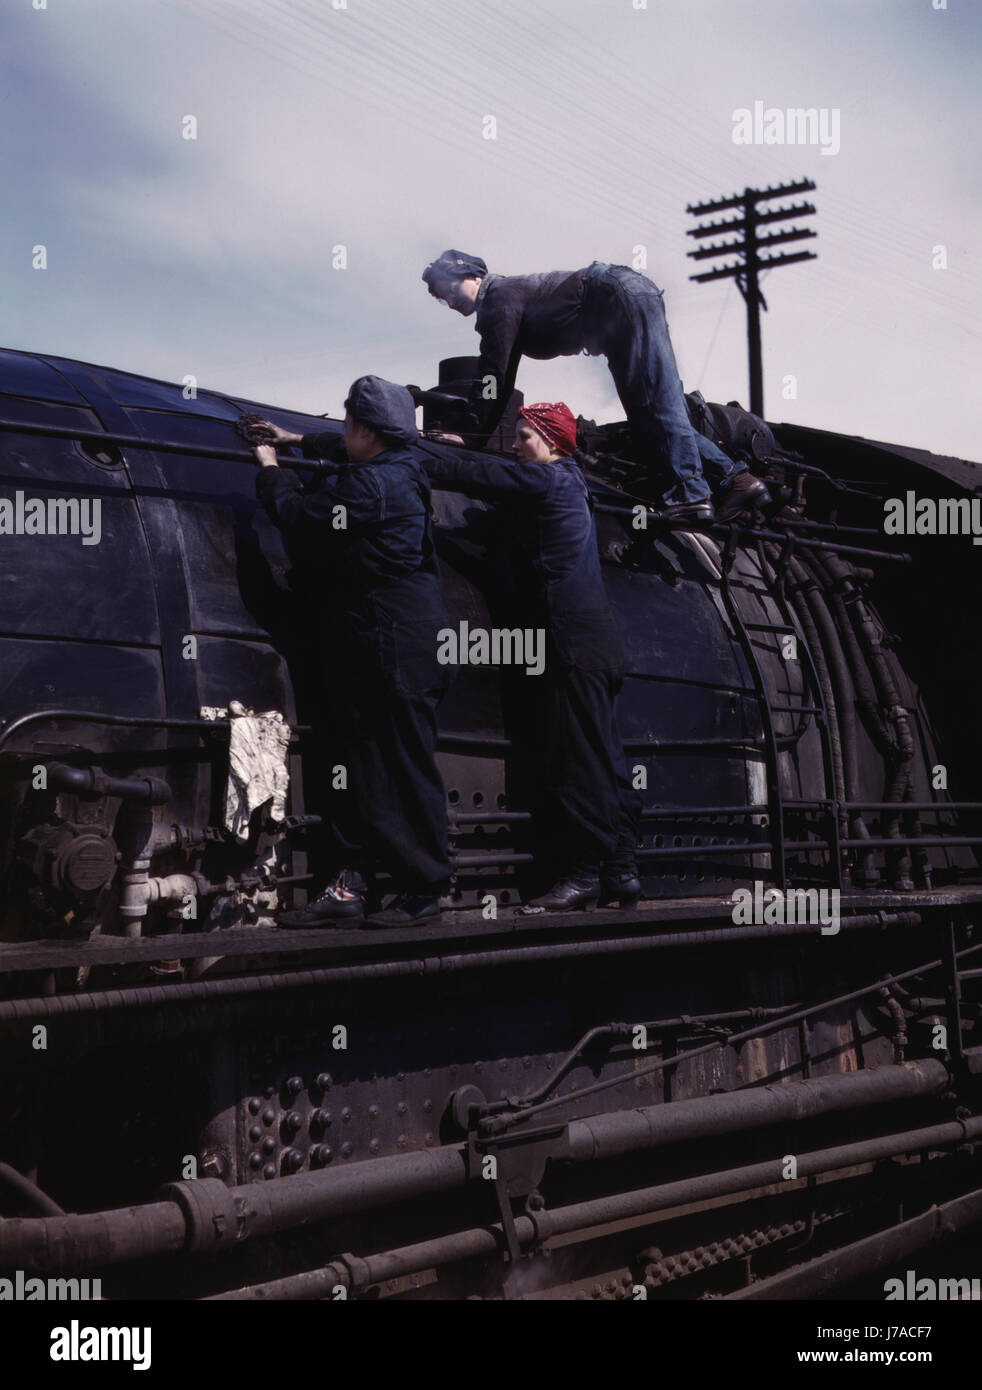 Women wipers of the Chicago and North Western Railroad cleaning a locomotive, 1943. Stock Photo